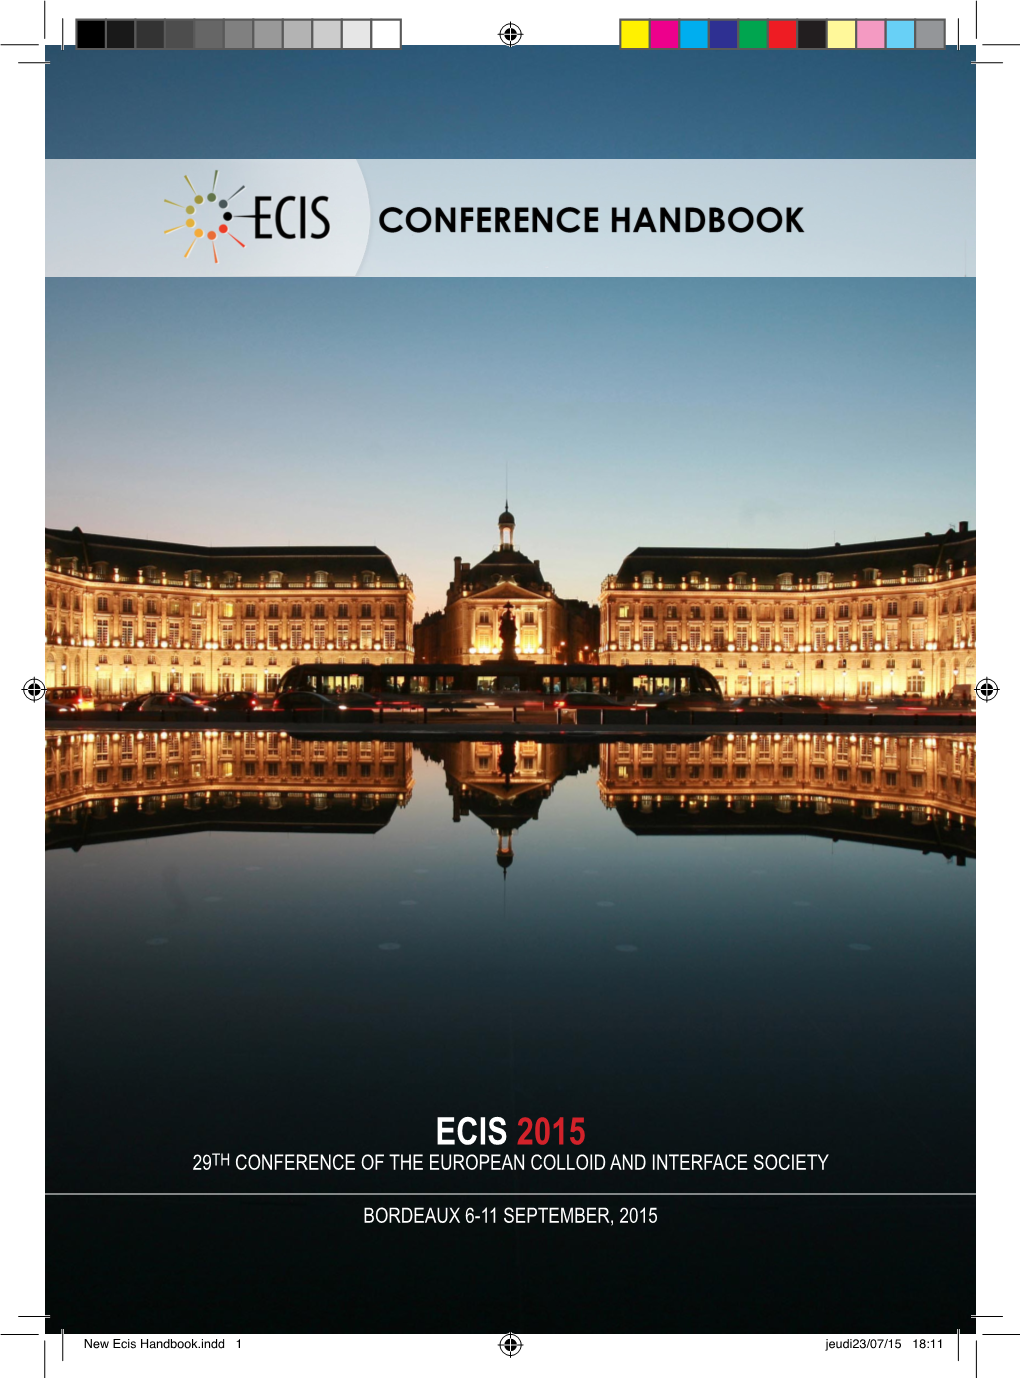 Ecis 2015 29Th Conference of the European Colloid and Interface Society